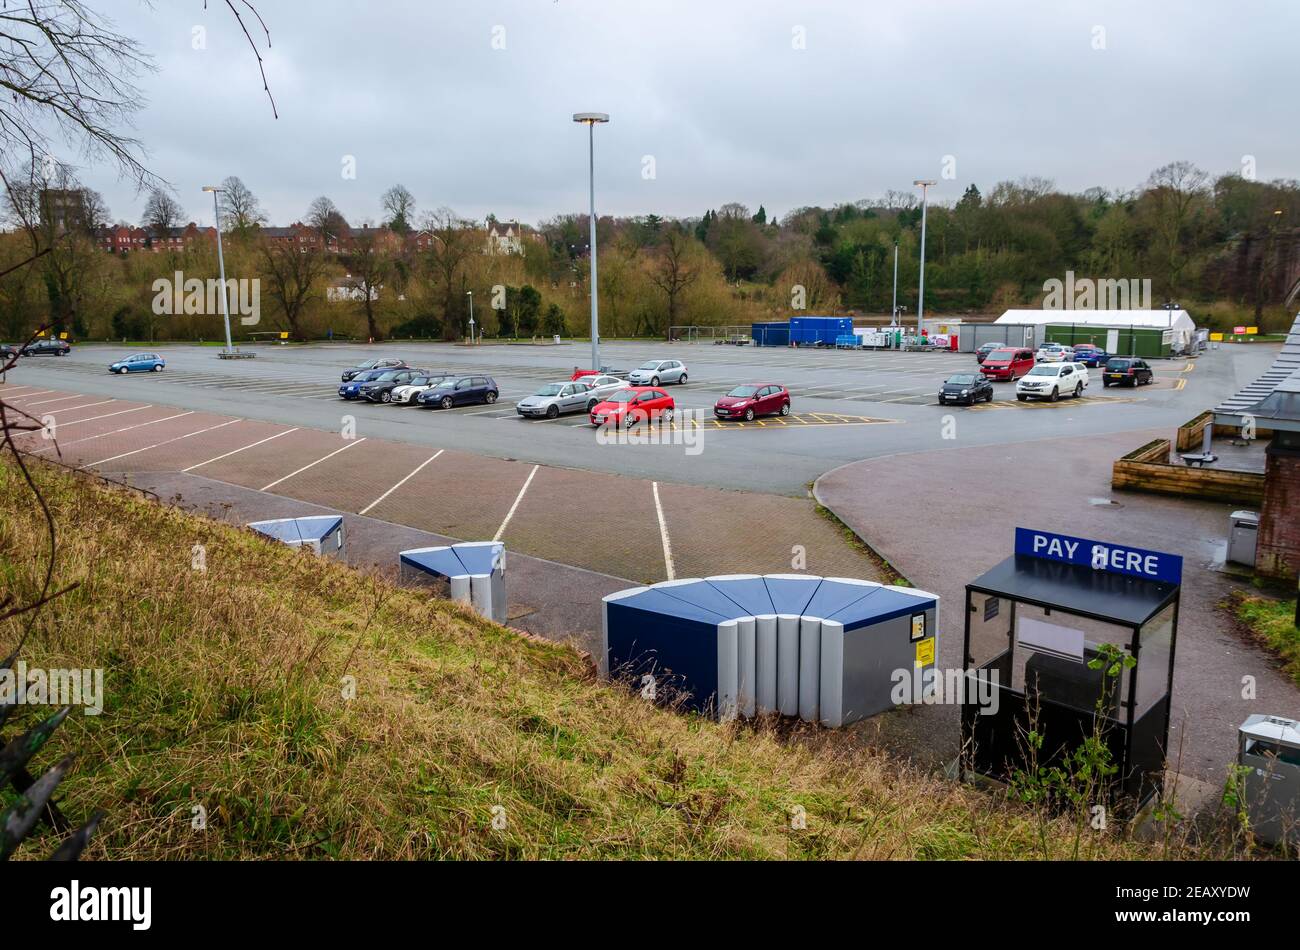 Chester; UK: Jan 29, 2021: The Little Roodee Car, coach and lorry park is very quiet on a damp Friday afternoon during lockdown due to the pandemic co Stock Photo